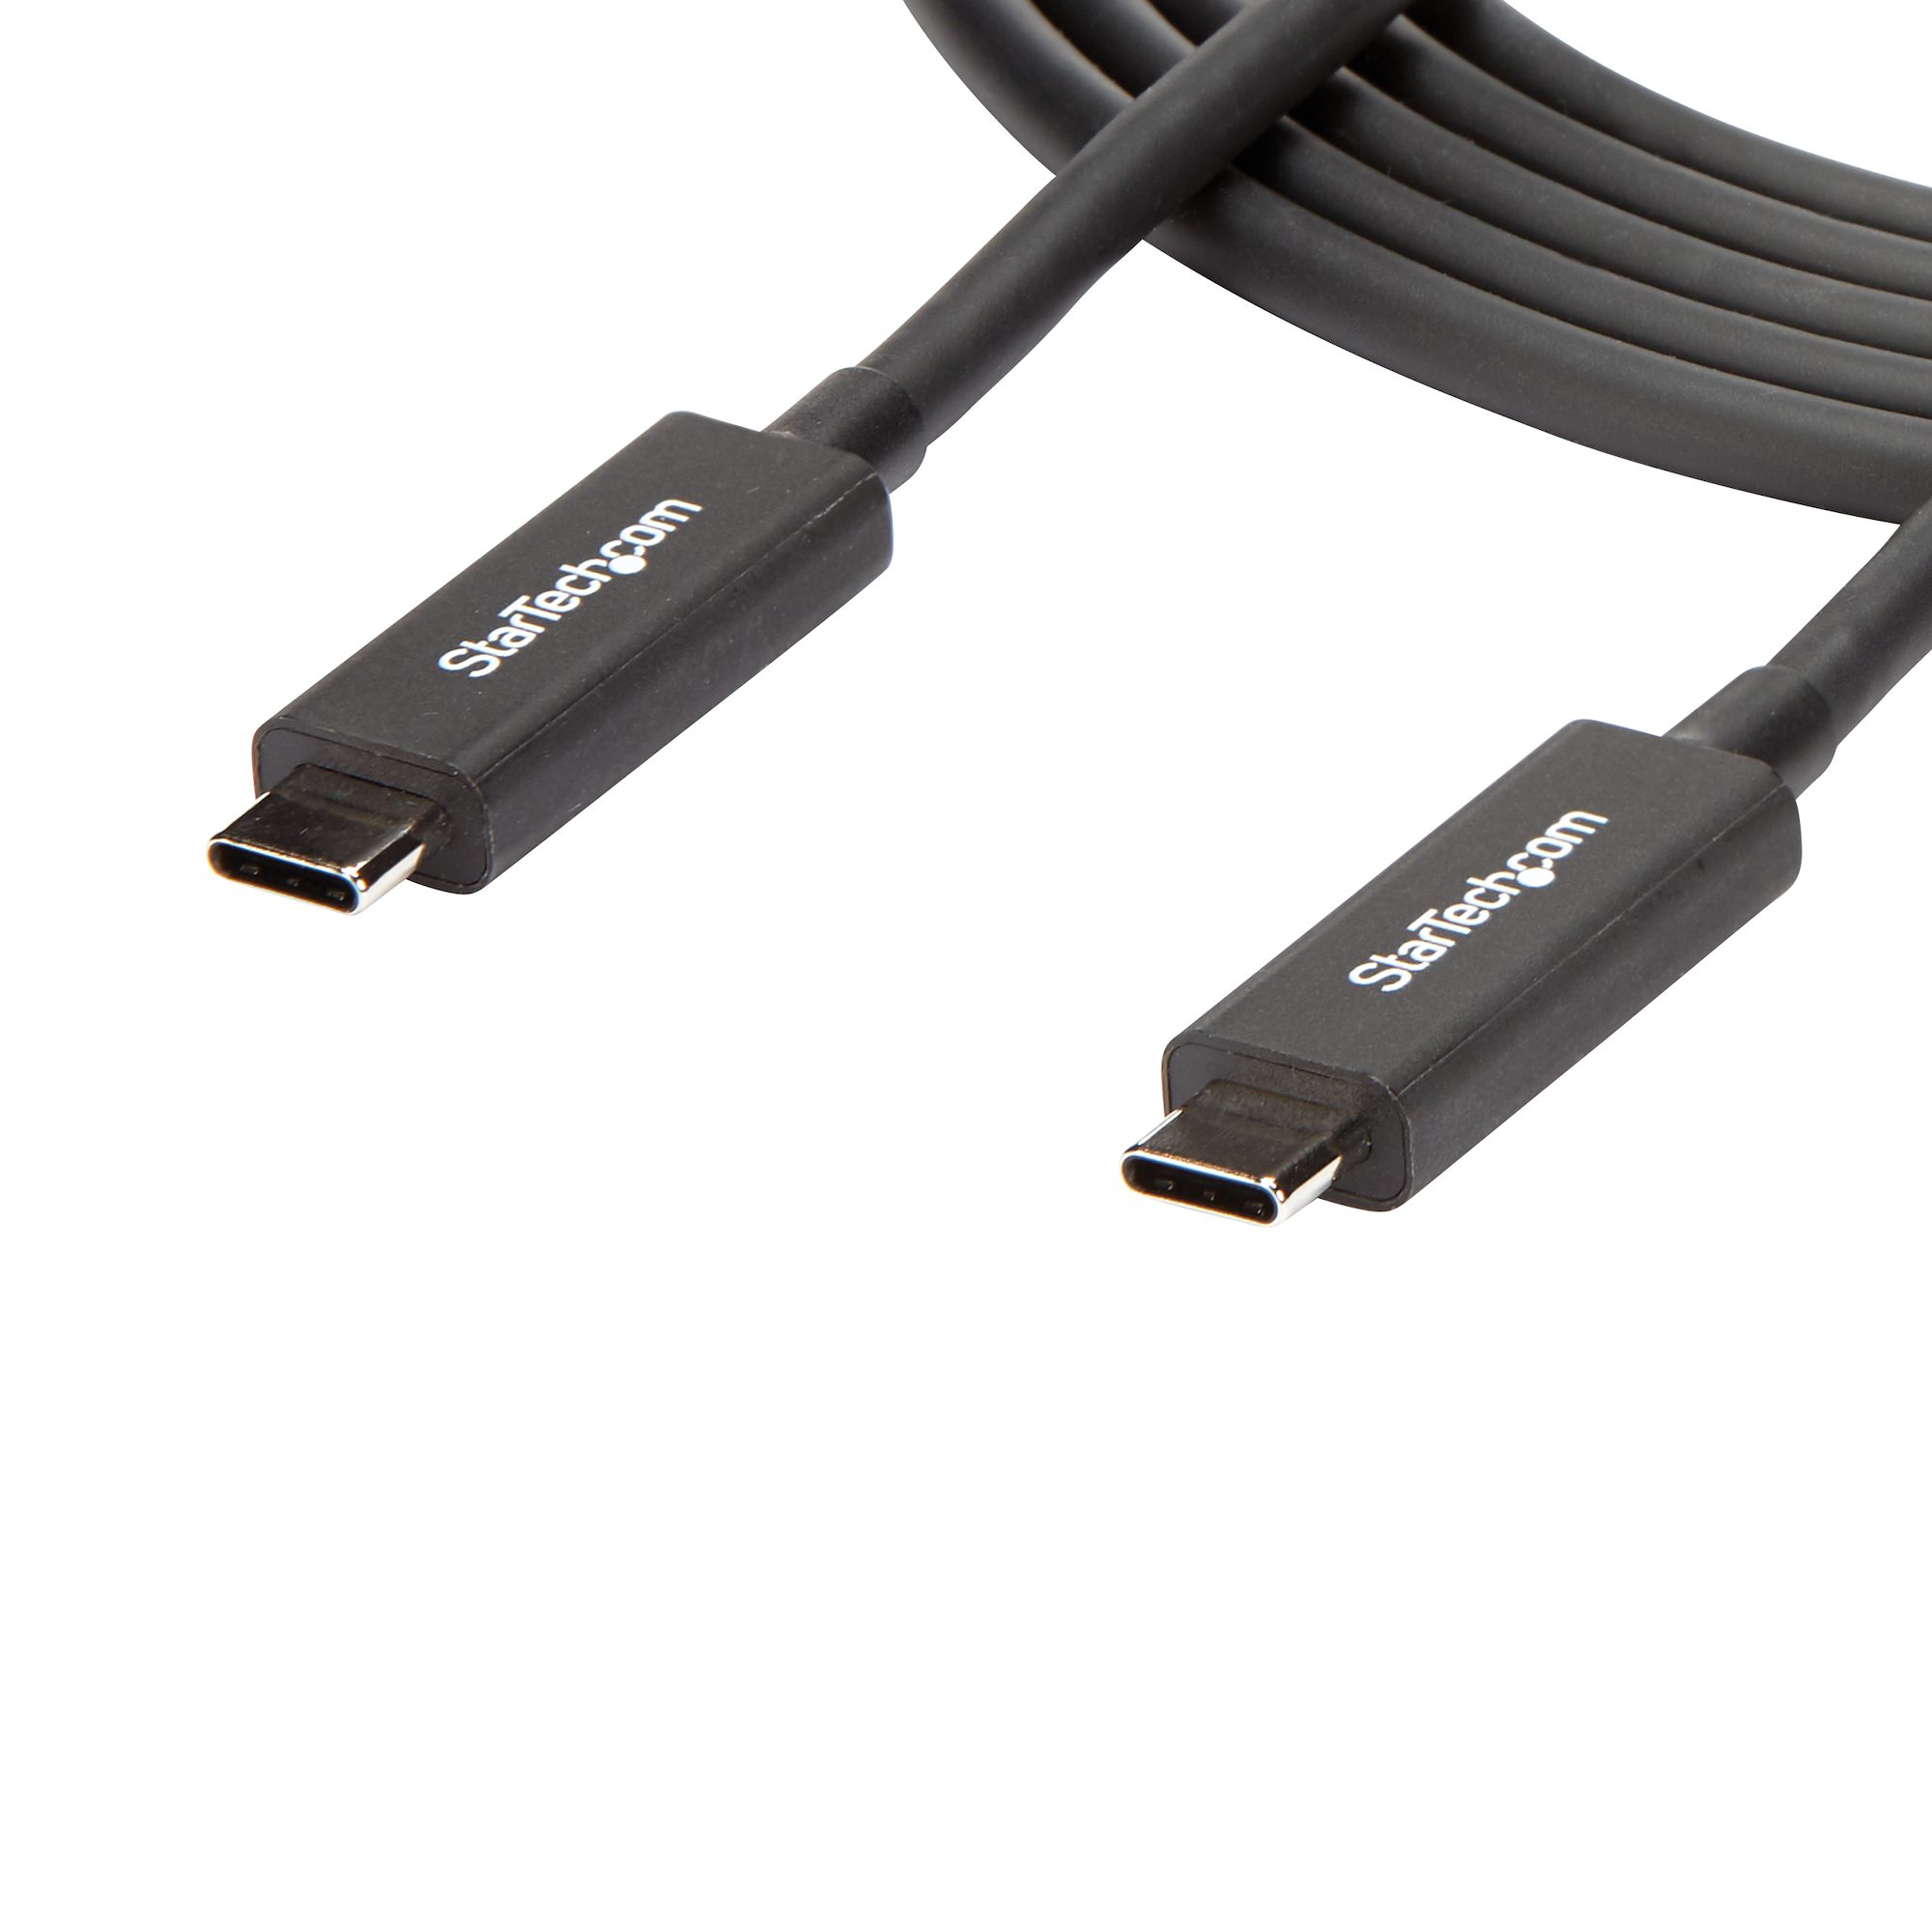 6 ft. (2 m) Thunderbolt 3 Cable with 100W Power Delivery - 40Gbps